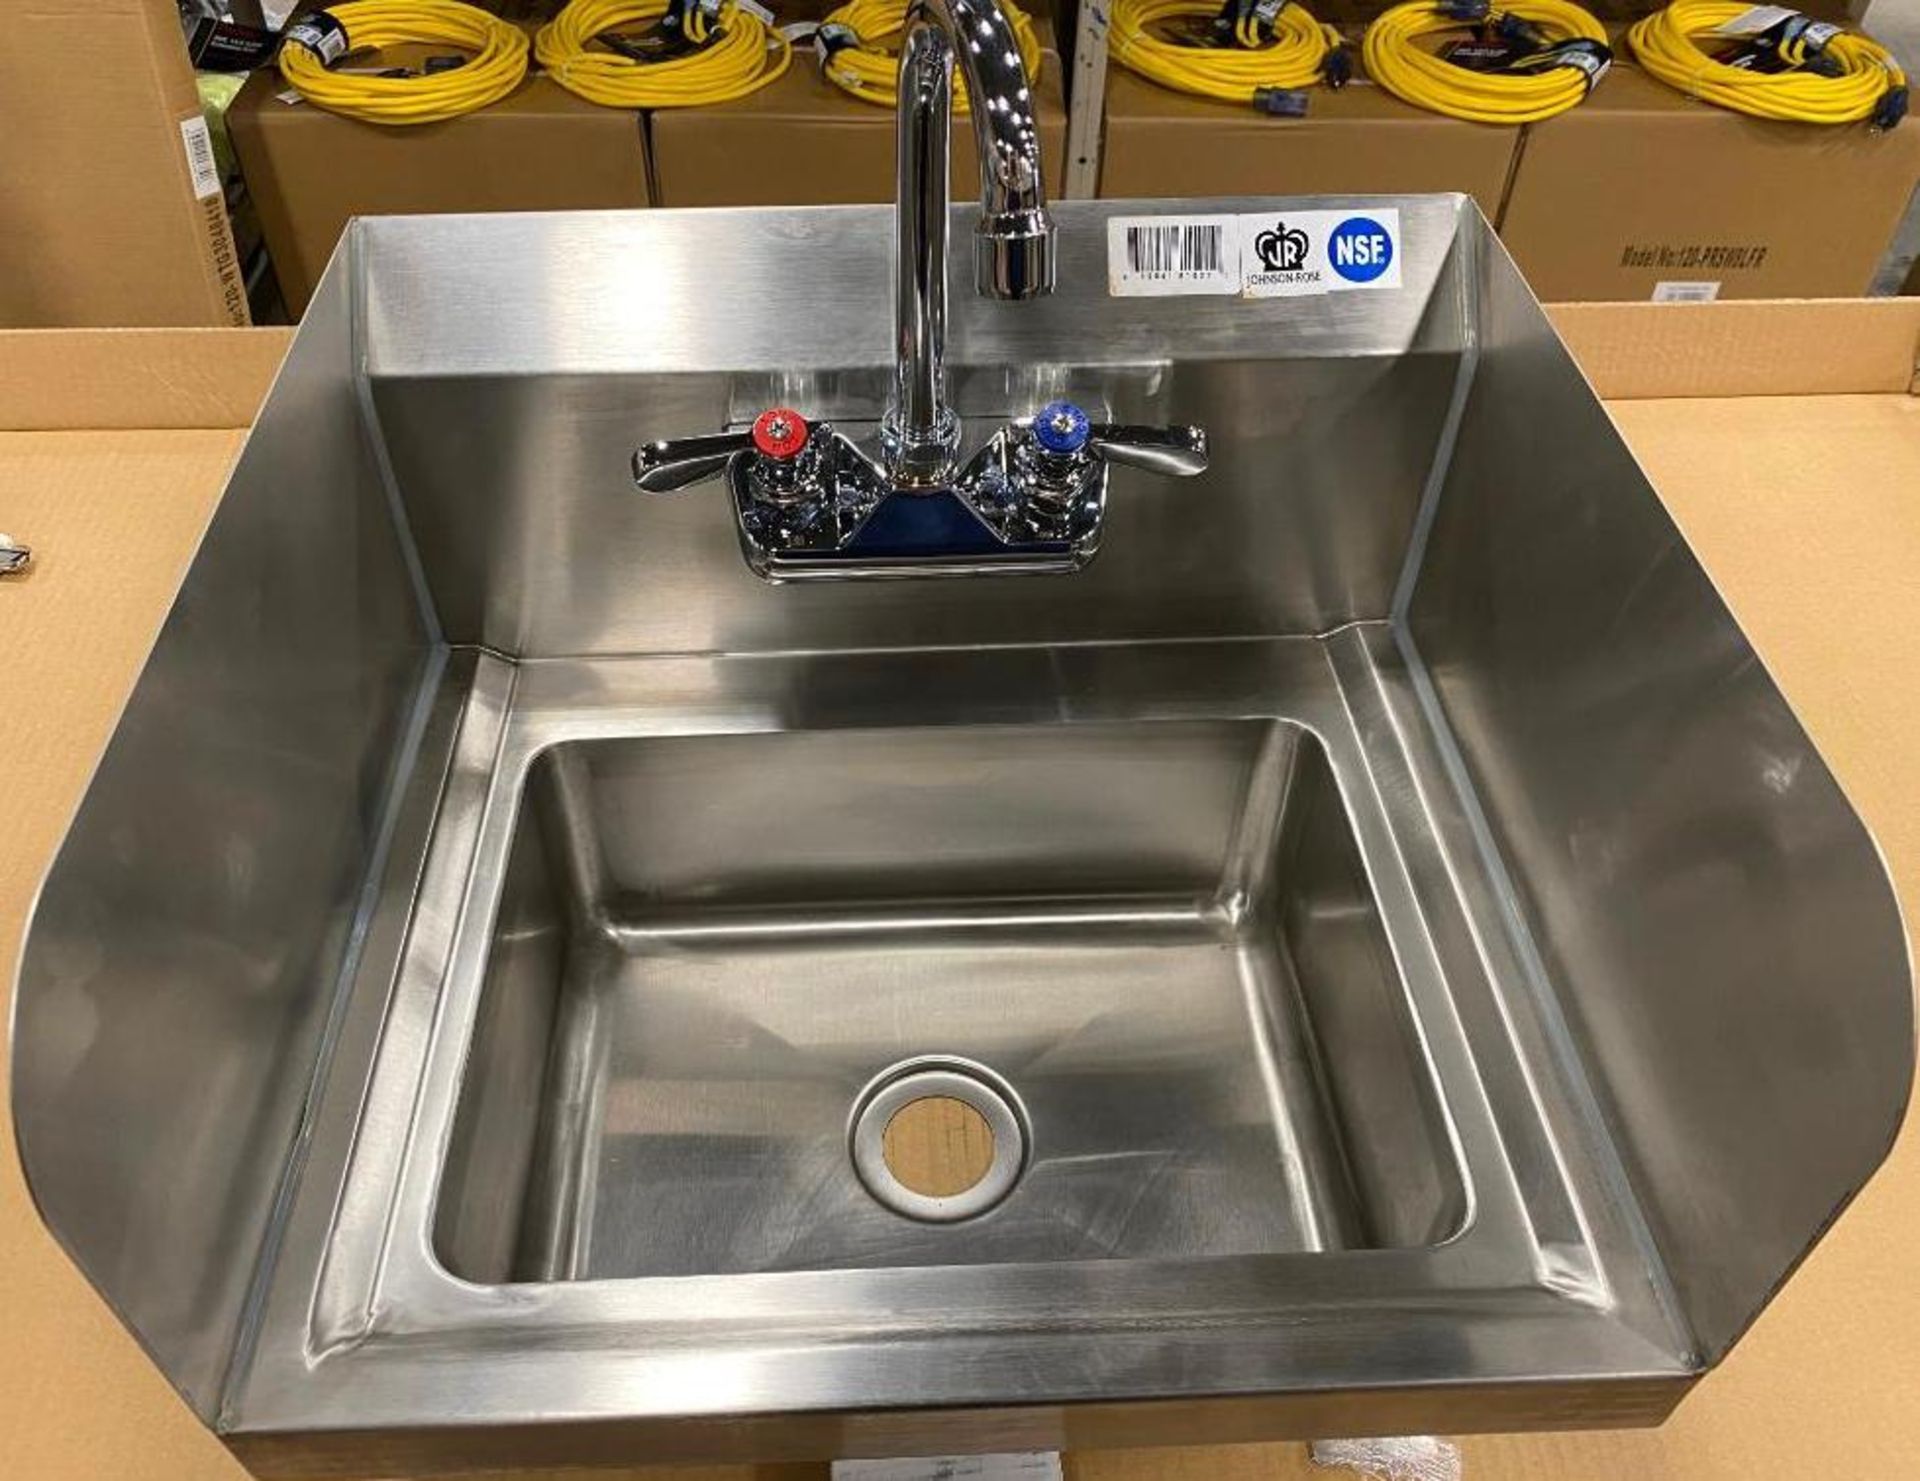 17" X 15.5" STAINLESS HAND SINK WITH SPLASHGUARDS, FAUCET GOOSE NECK, JOHNSON-ROSE 81501 - - Image 2 of 3